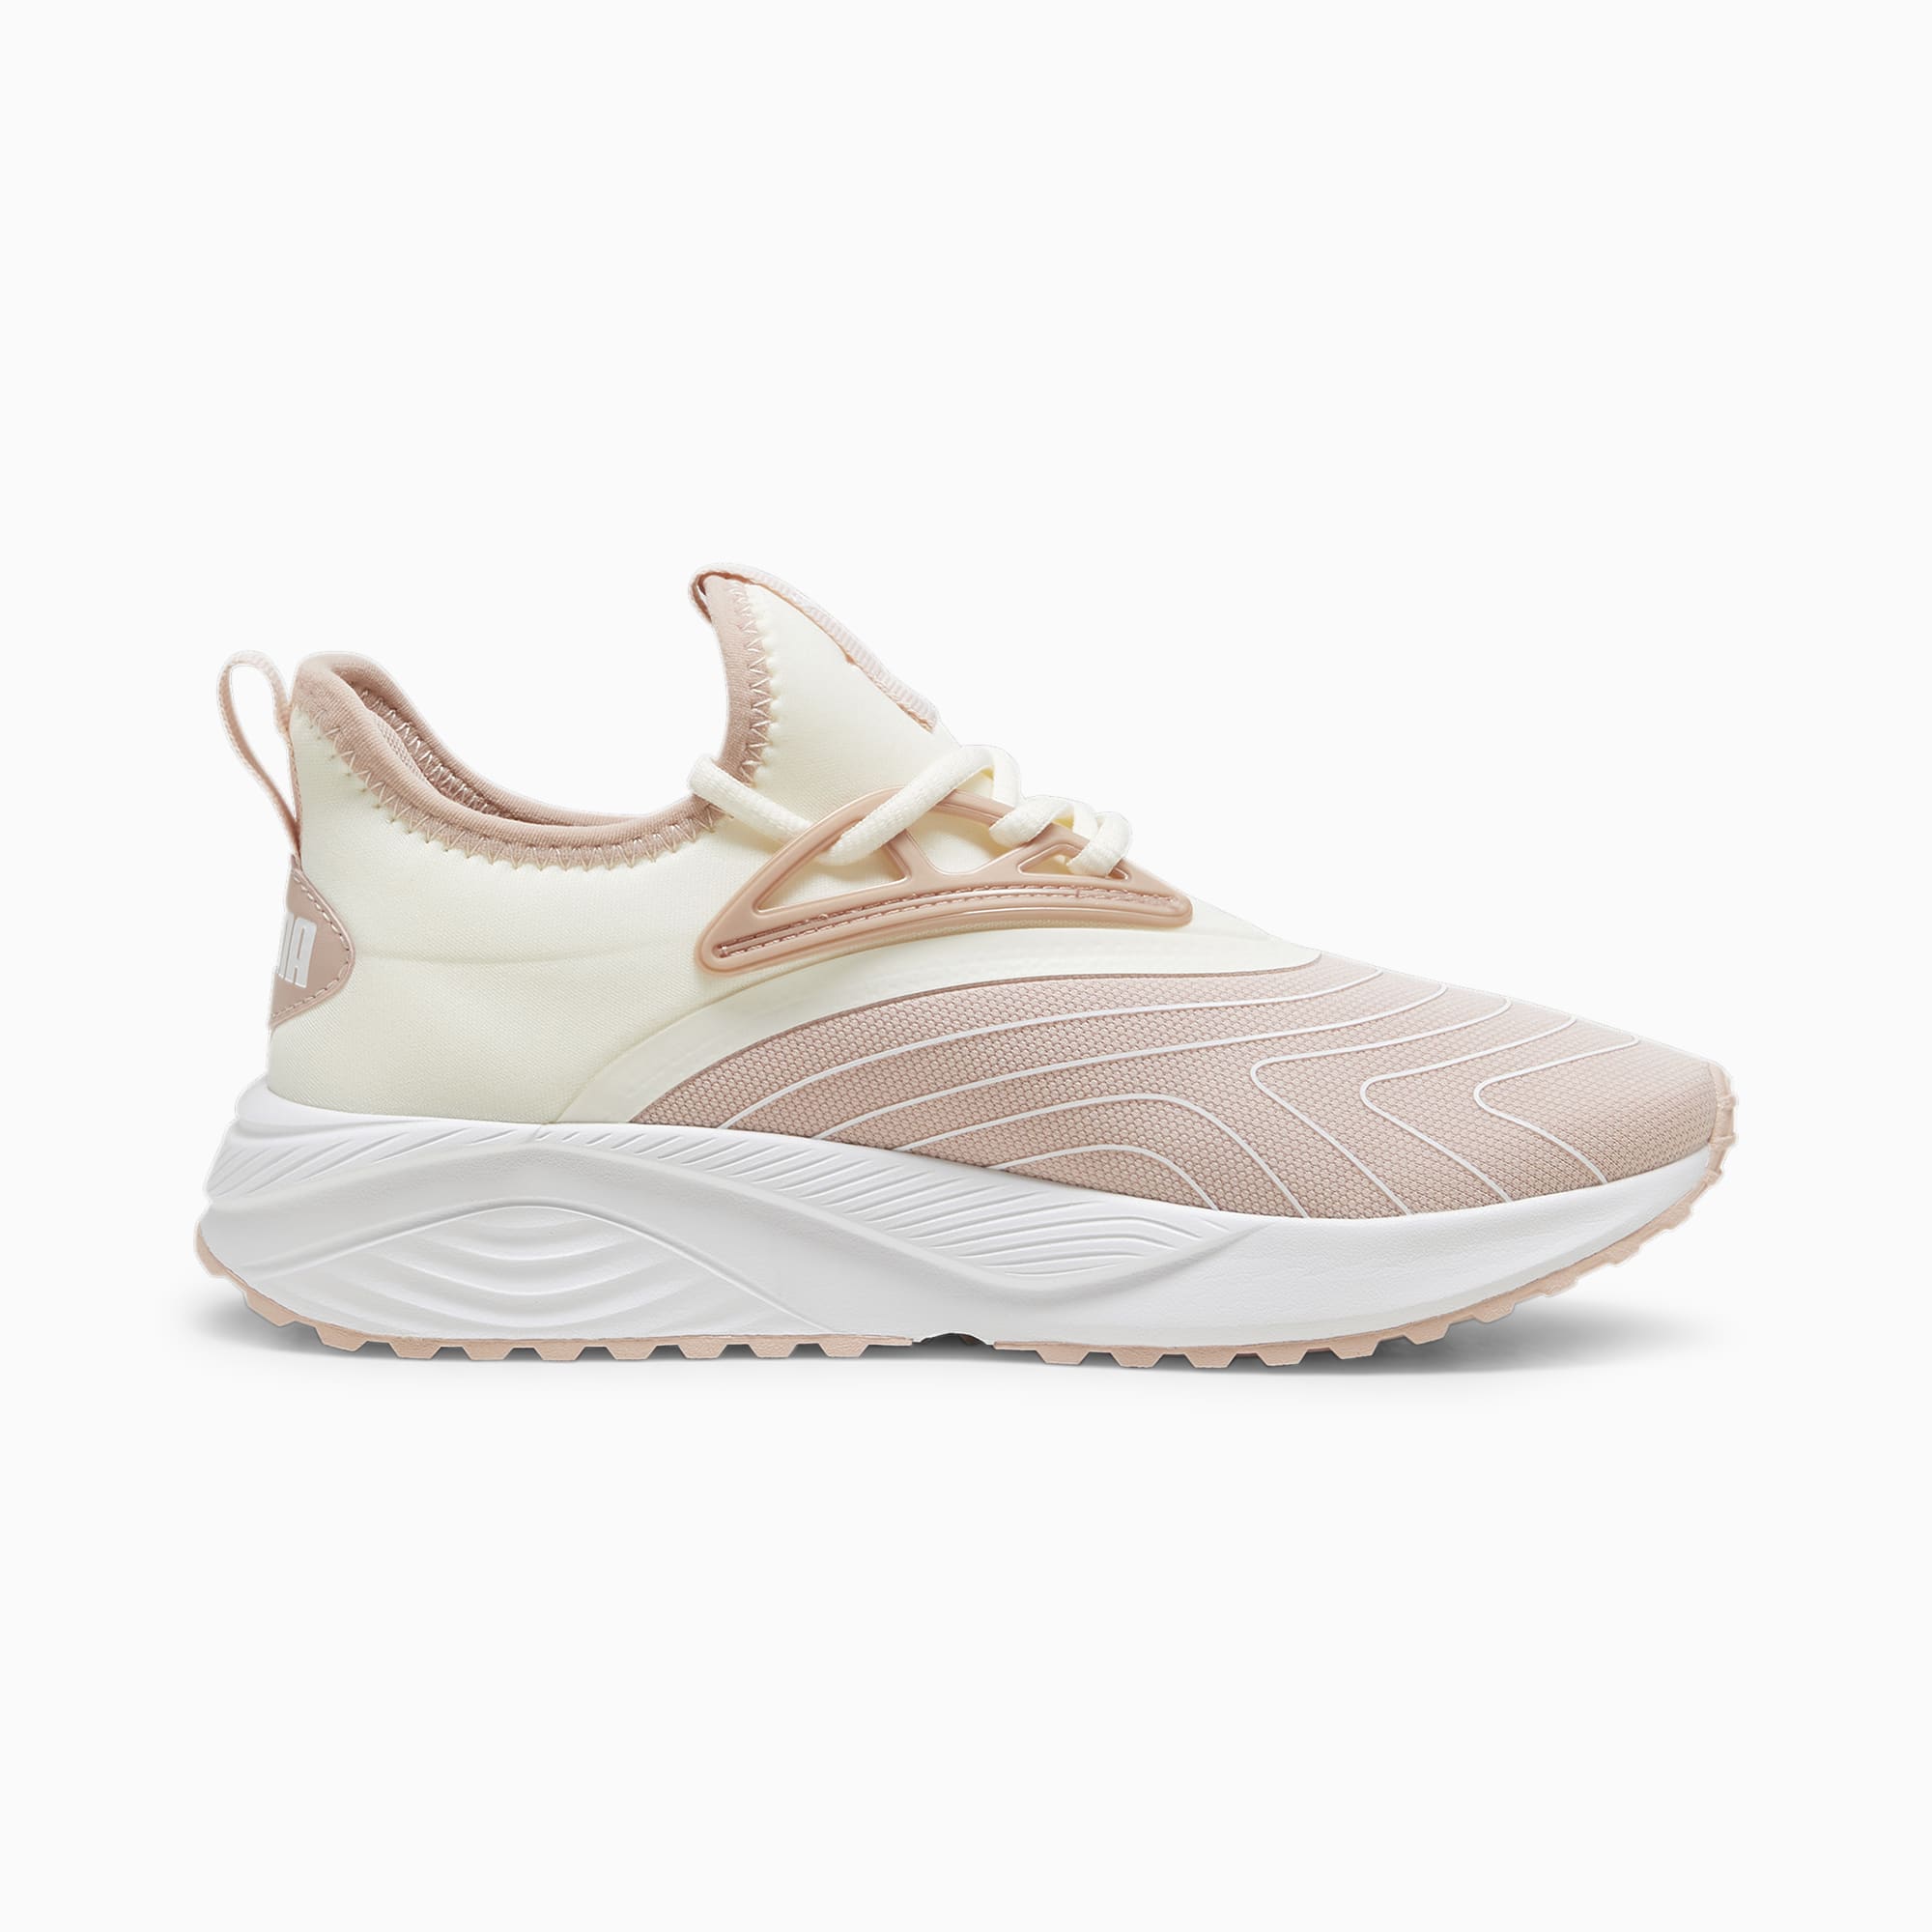 PUMA Pacer Beauty Women's Sneakers, Rose Quartz/Frosted Ivory/Rose Gold